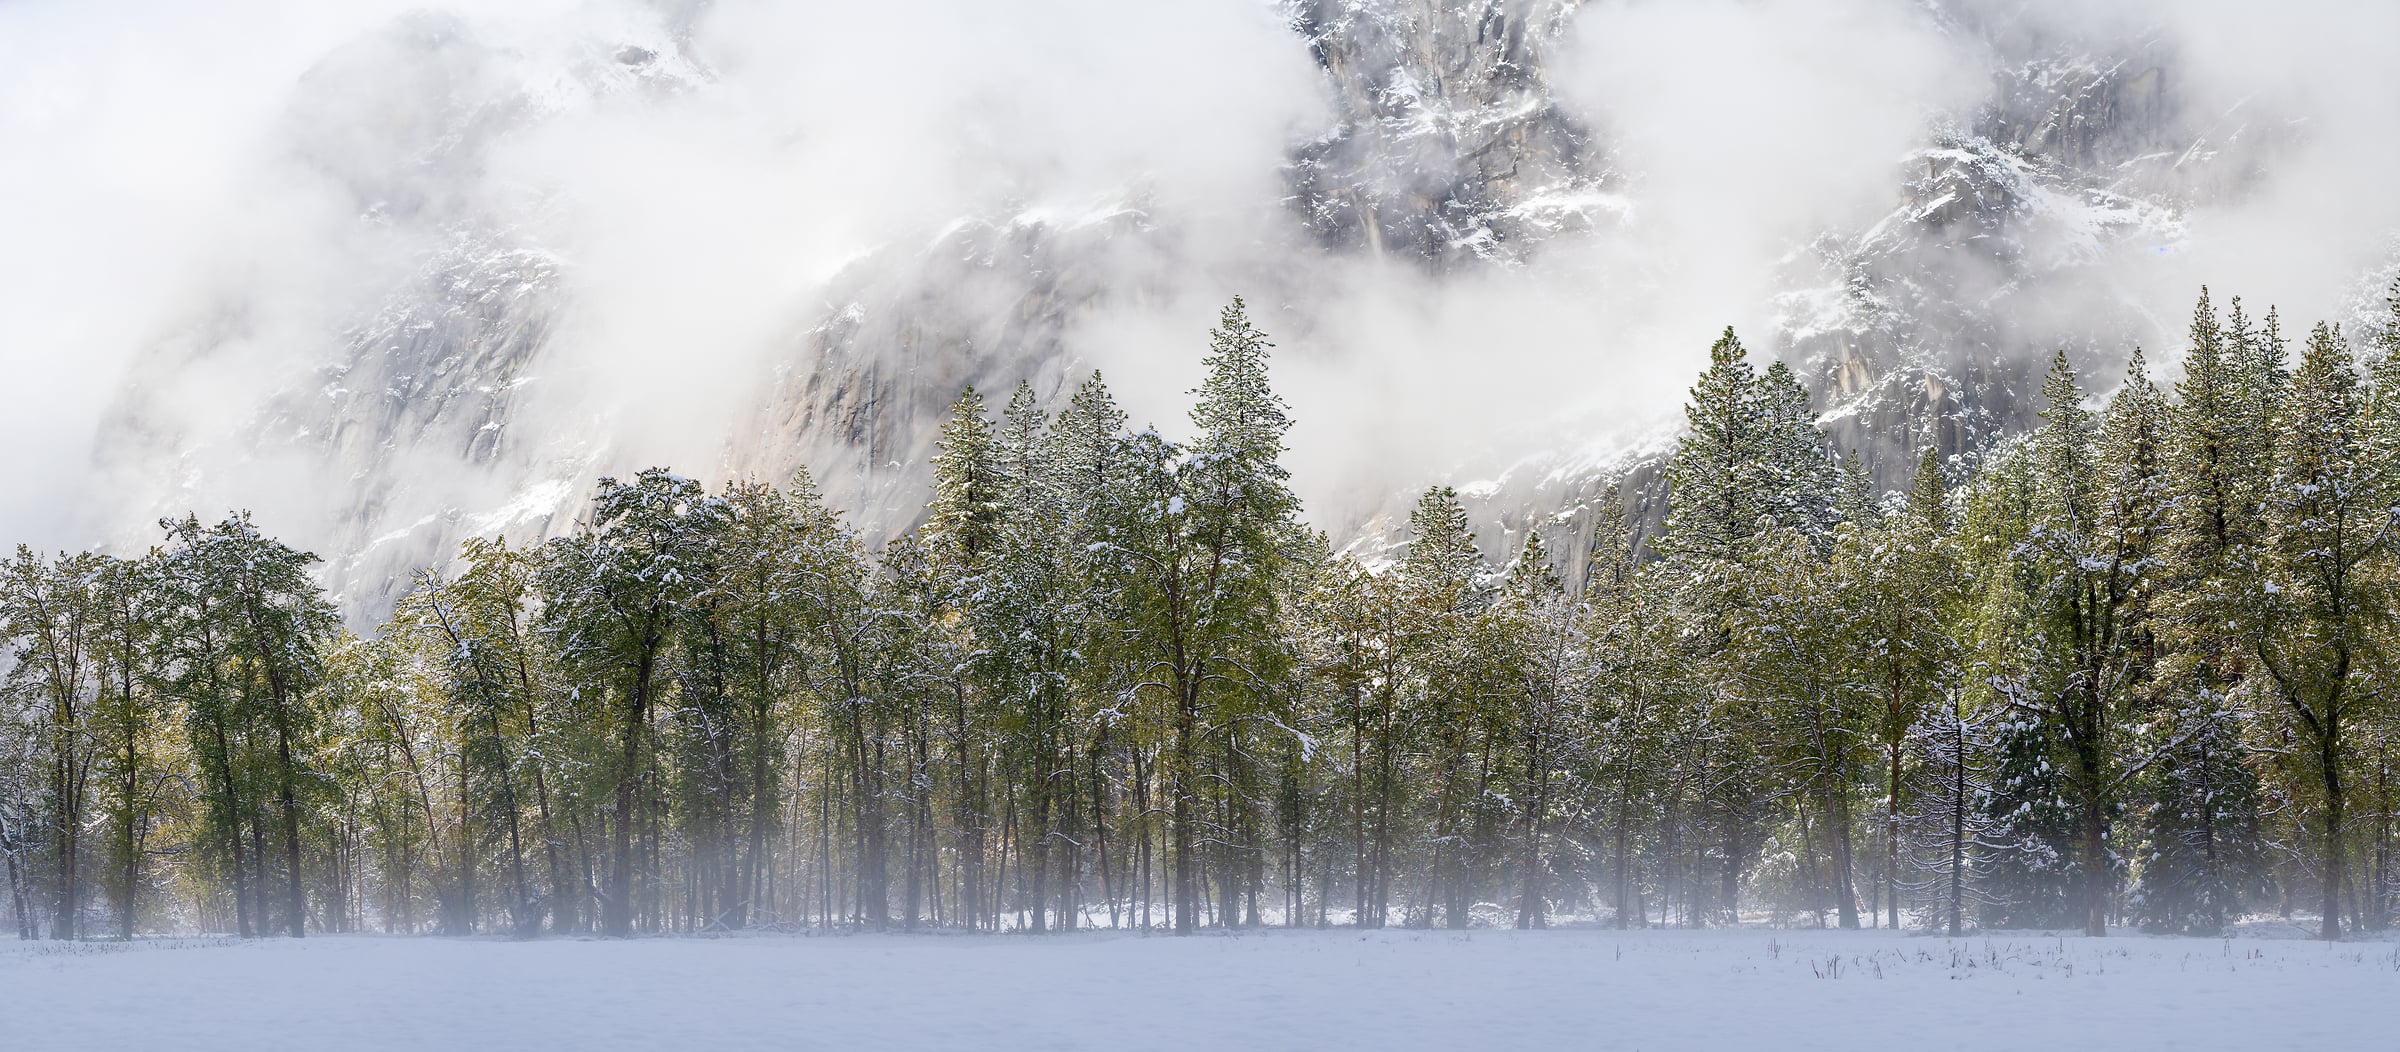 192 megapixels! A very high resolution, large-format VAST photo print of a beautiful winter scene with snow-covered ground, trees, and mountains with mist; nature photograph created by Jeff Lewis in Yosemite National Park, California.